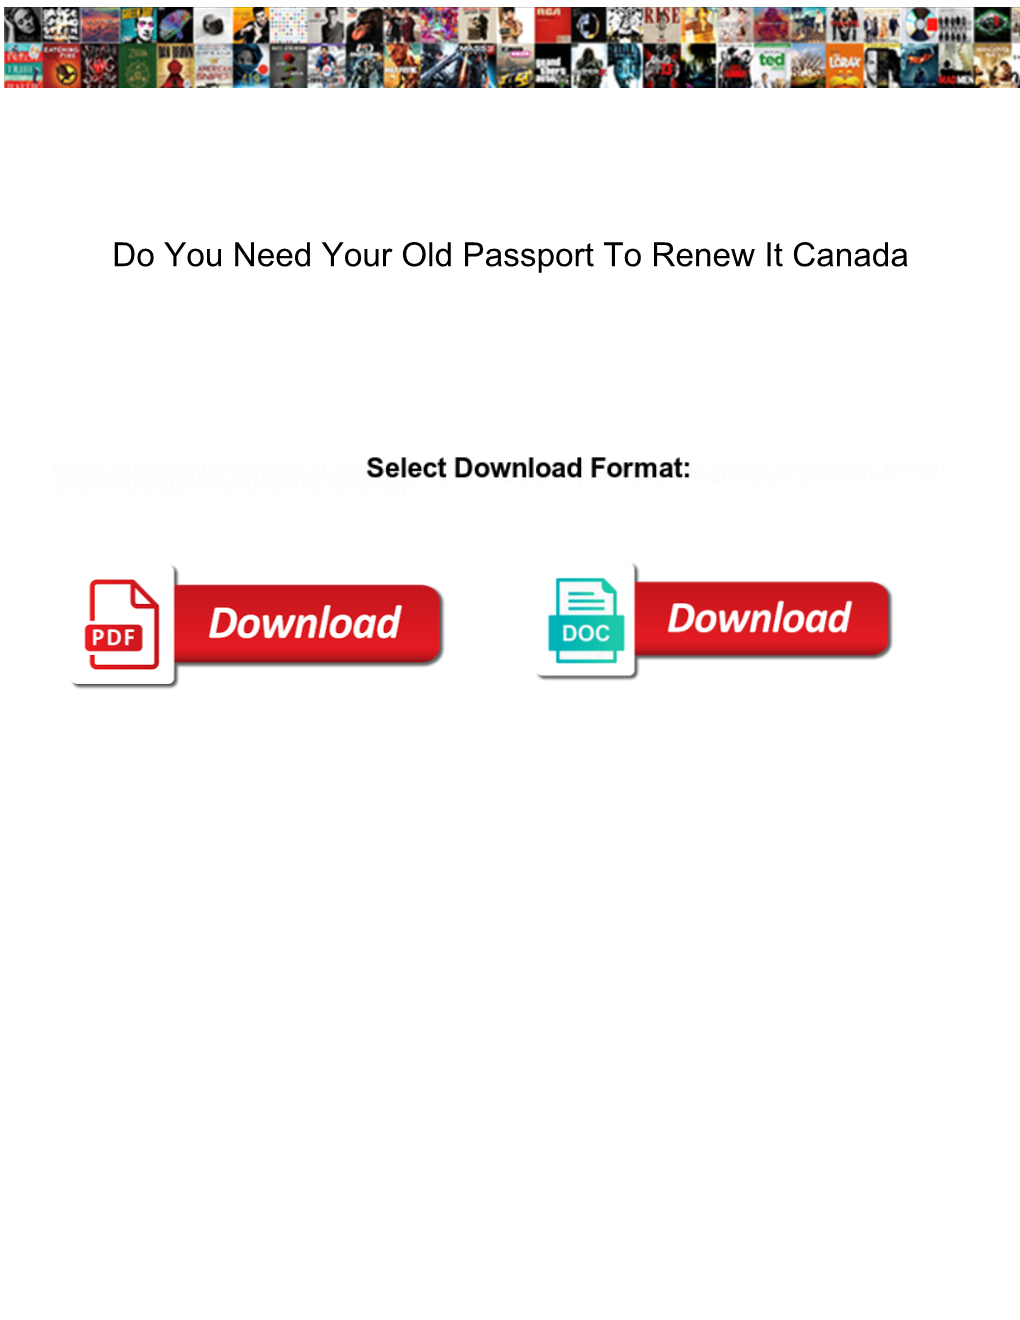 Do You Need Your Old Passport to Renew It Canada